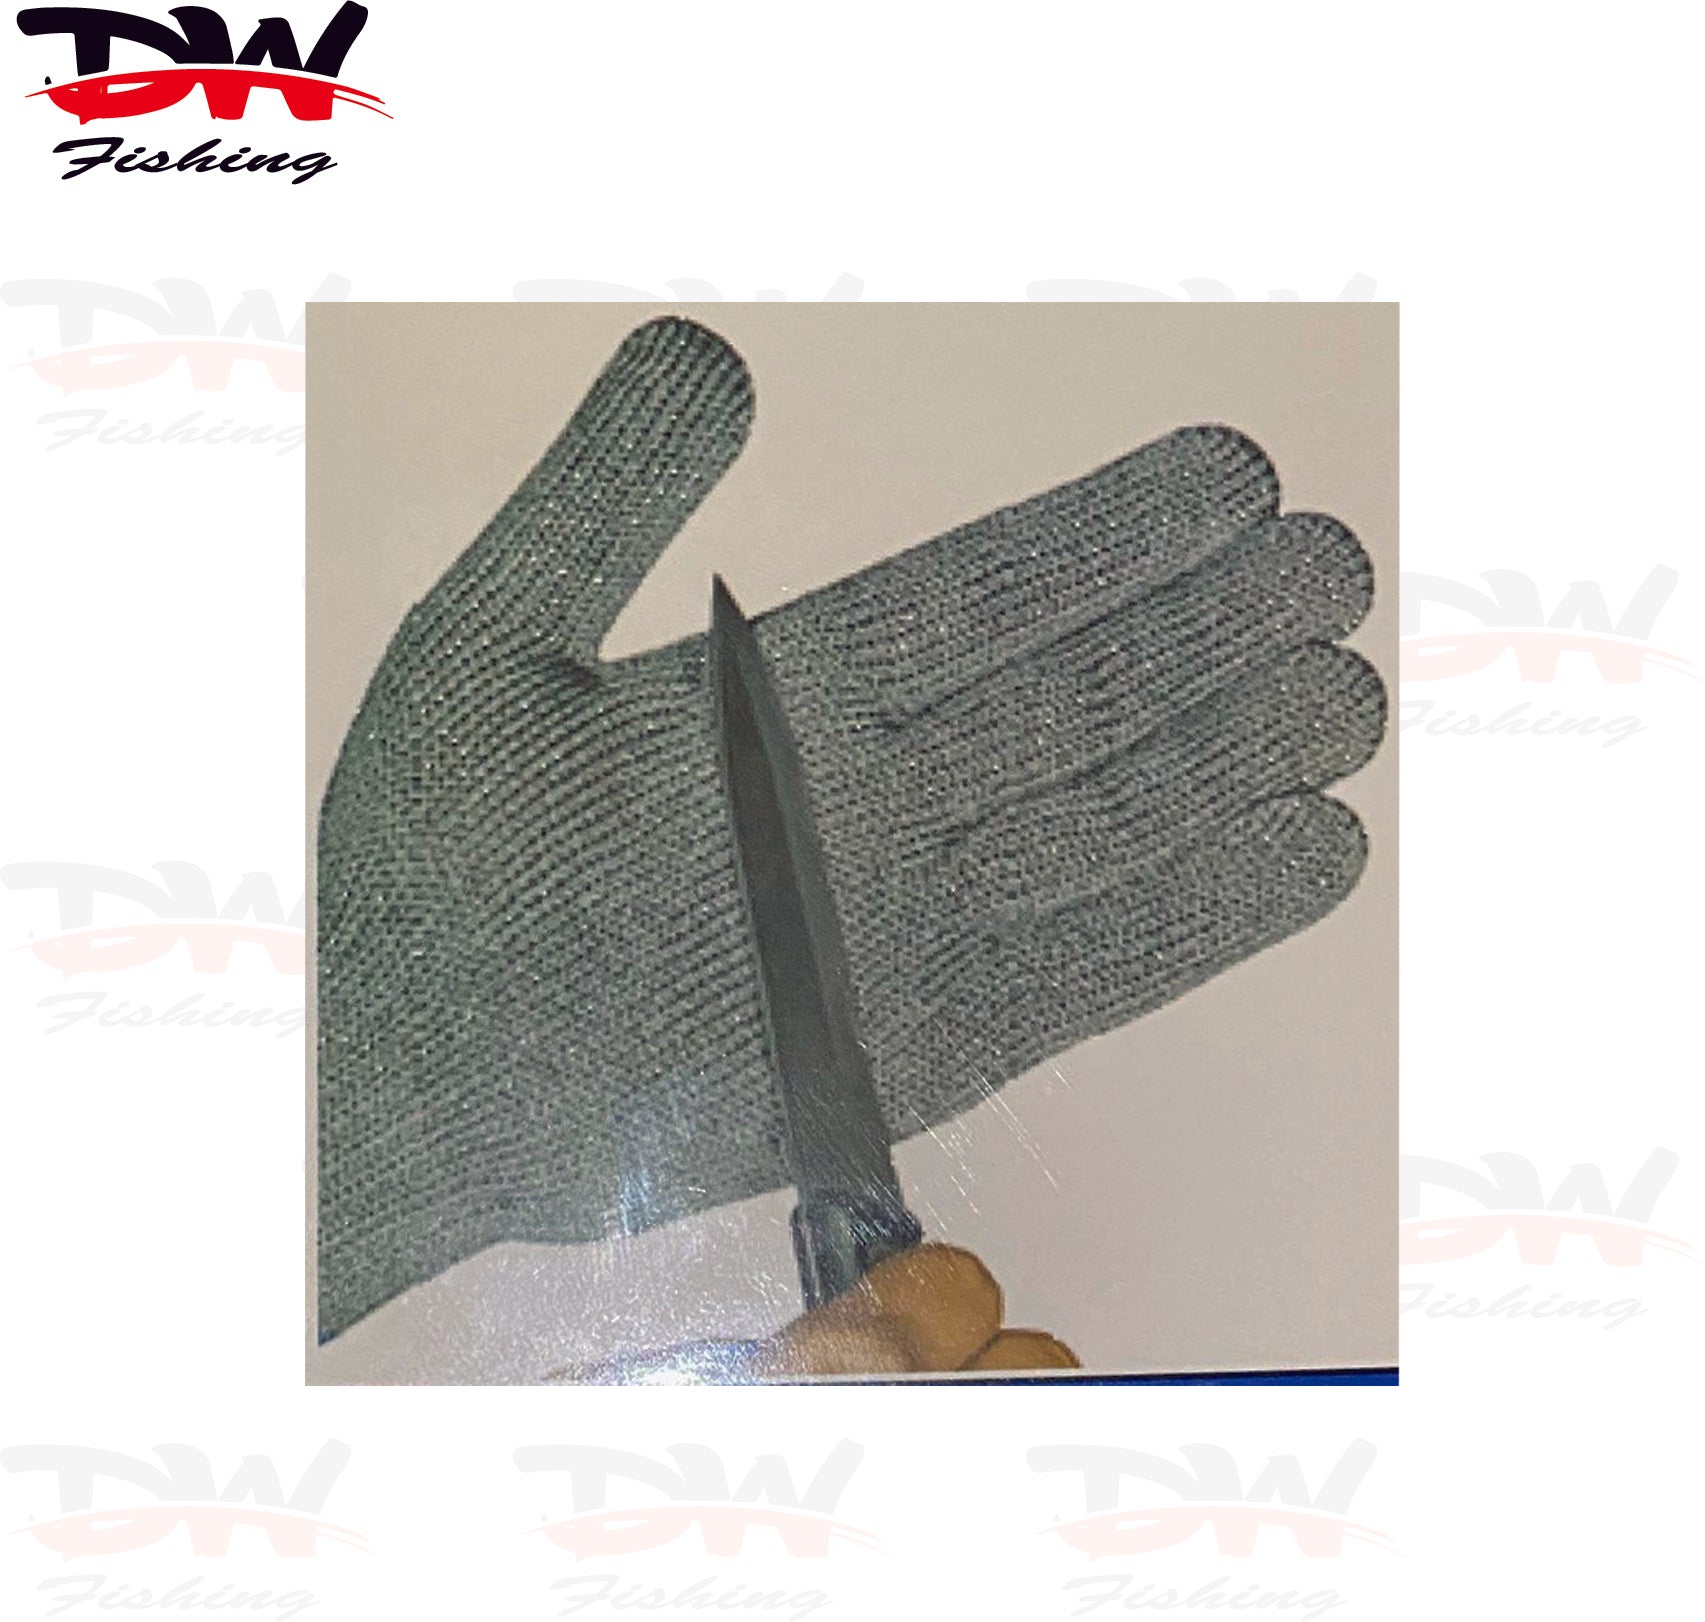 Stainless steel filleting glove gives knife cut protection